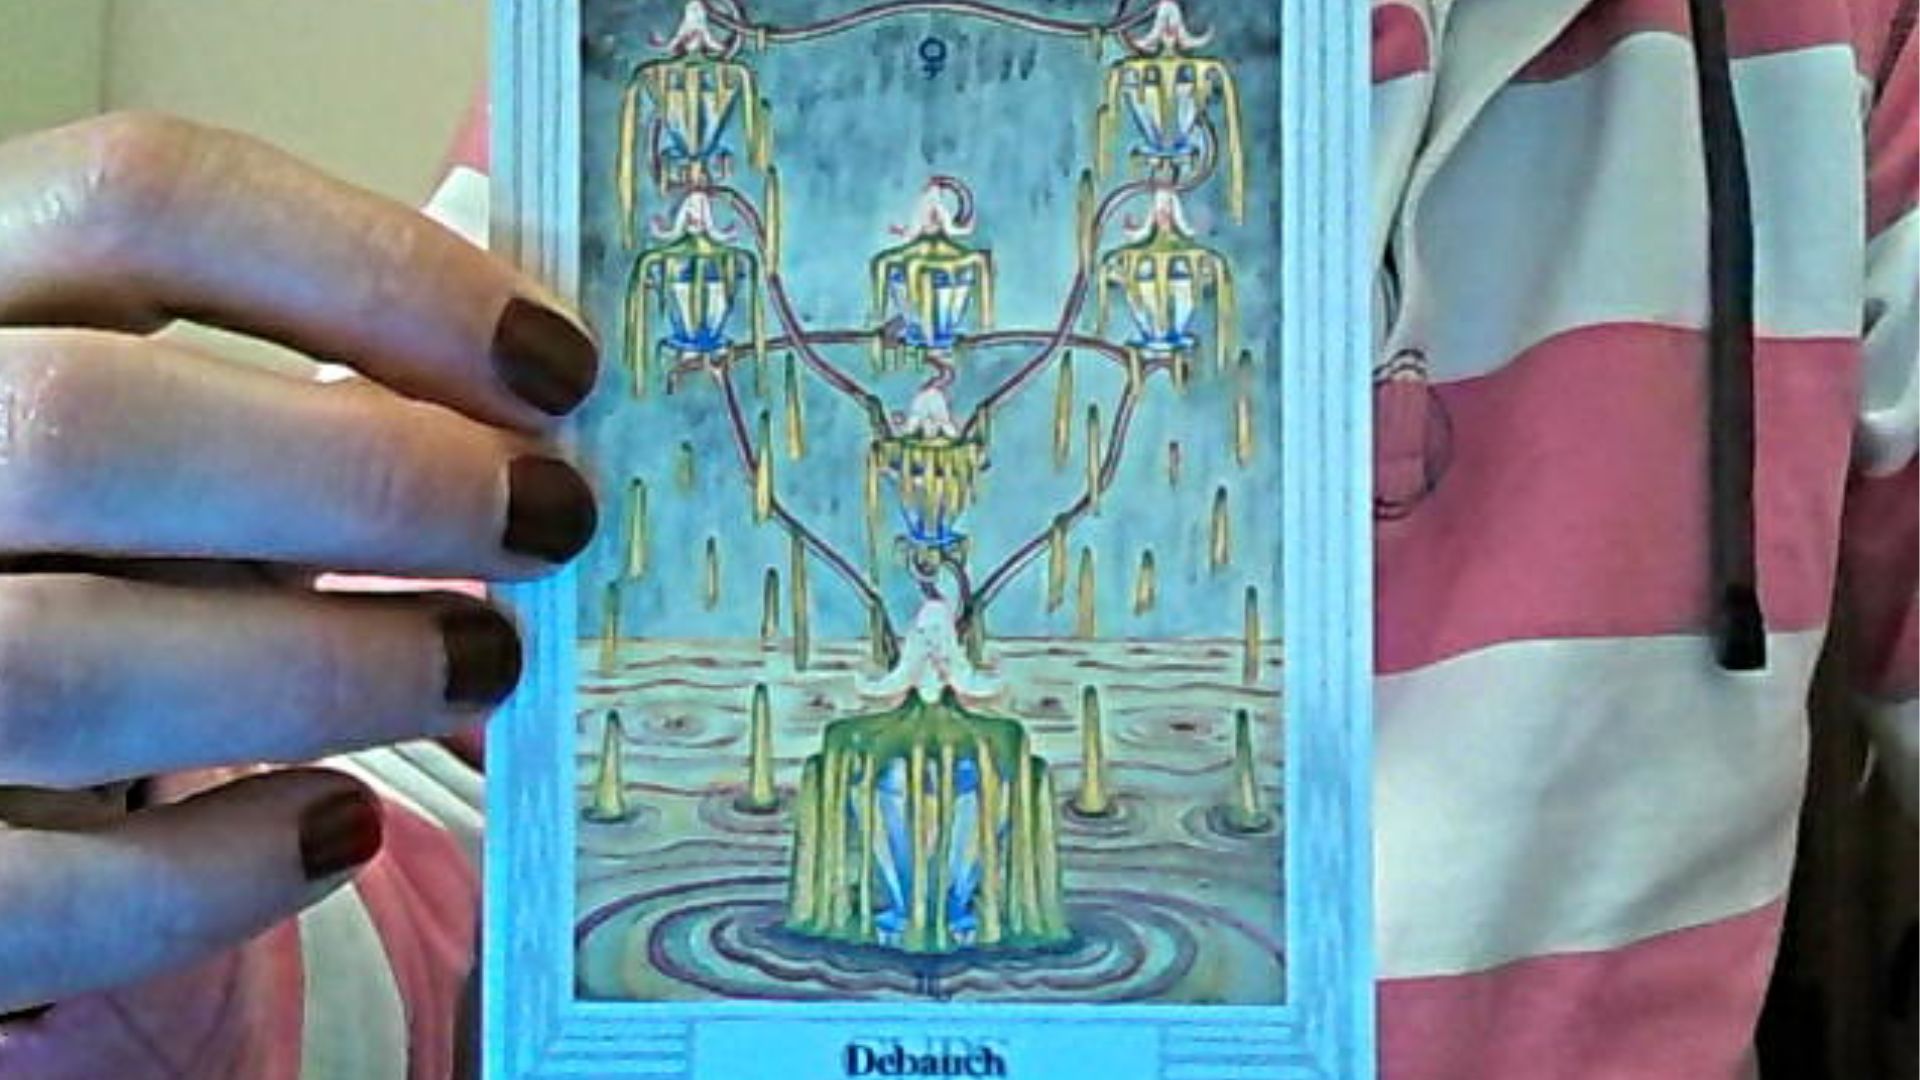 7 Of Cups Reversed - Deciphering The Complexities